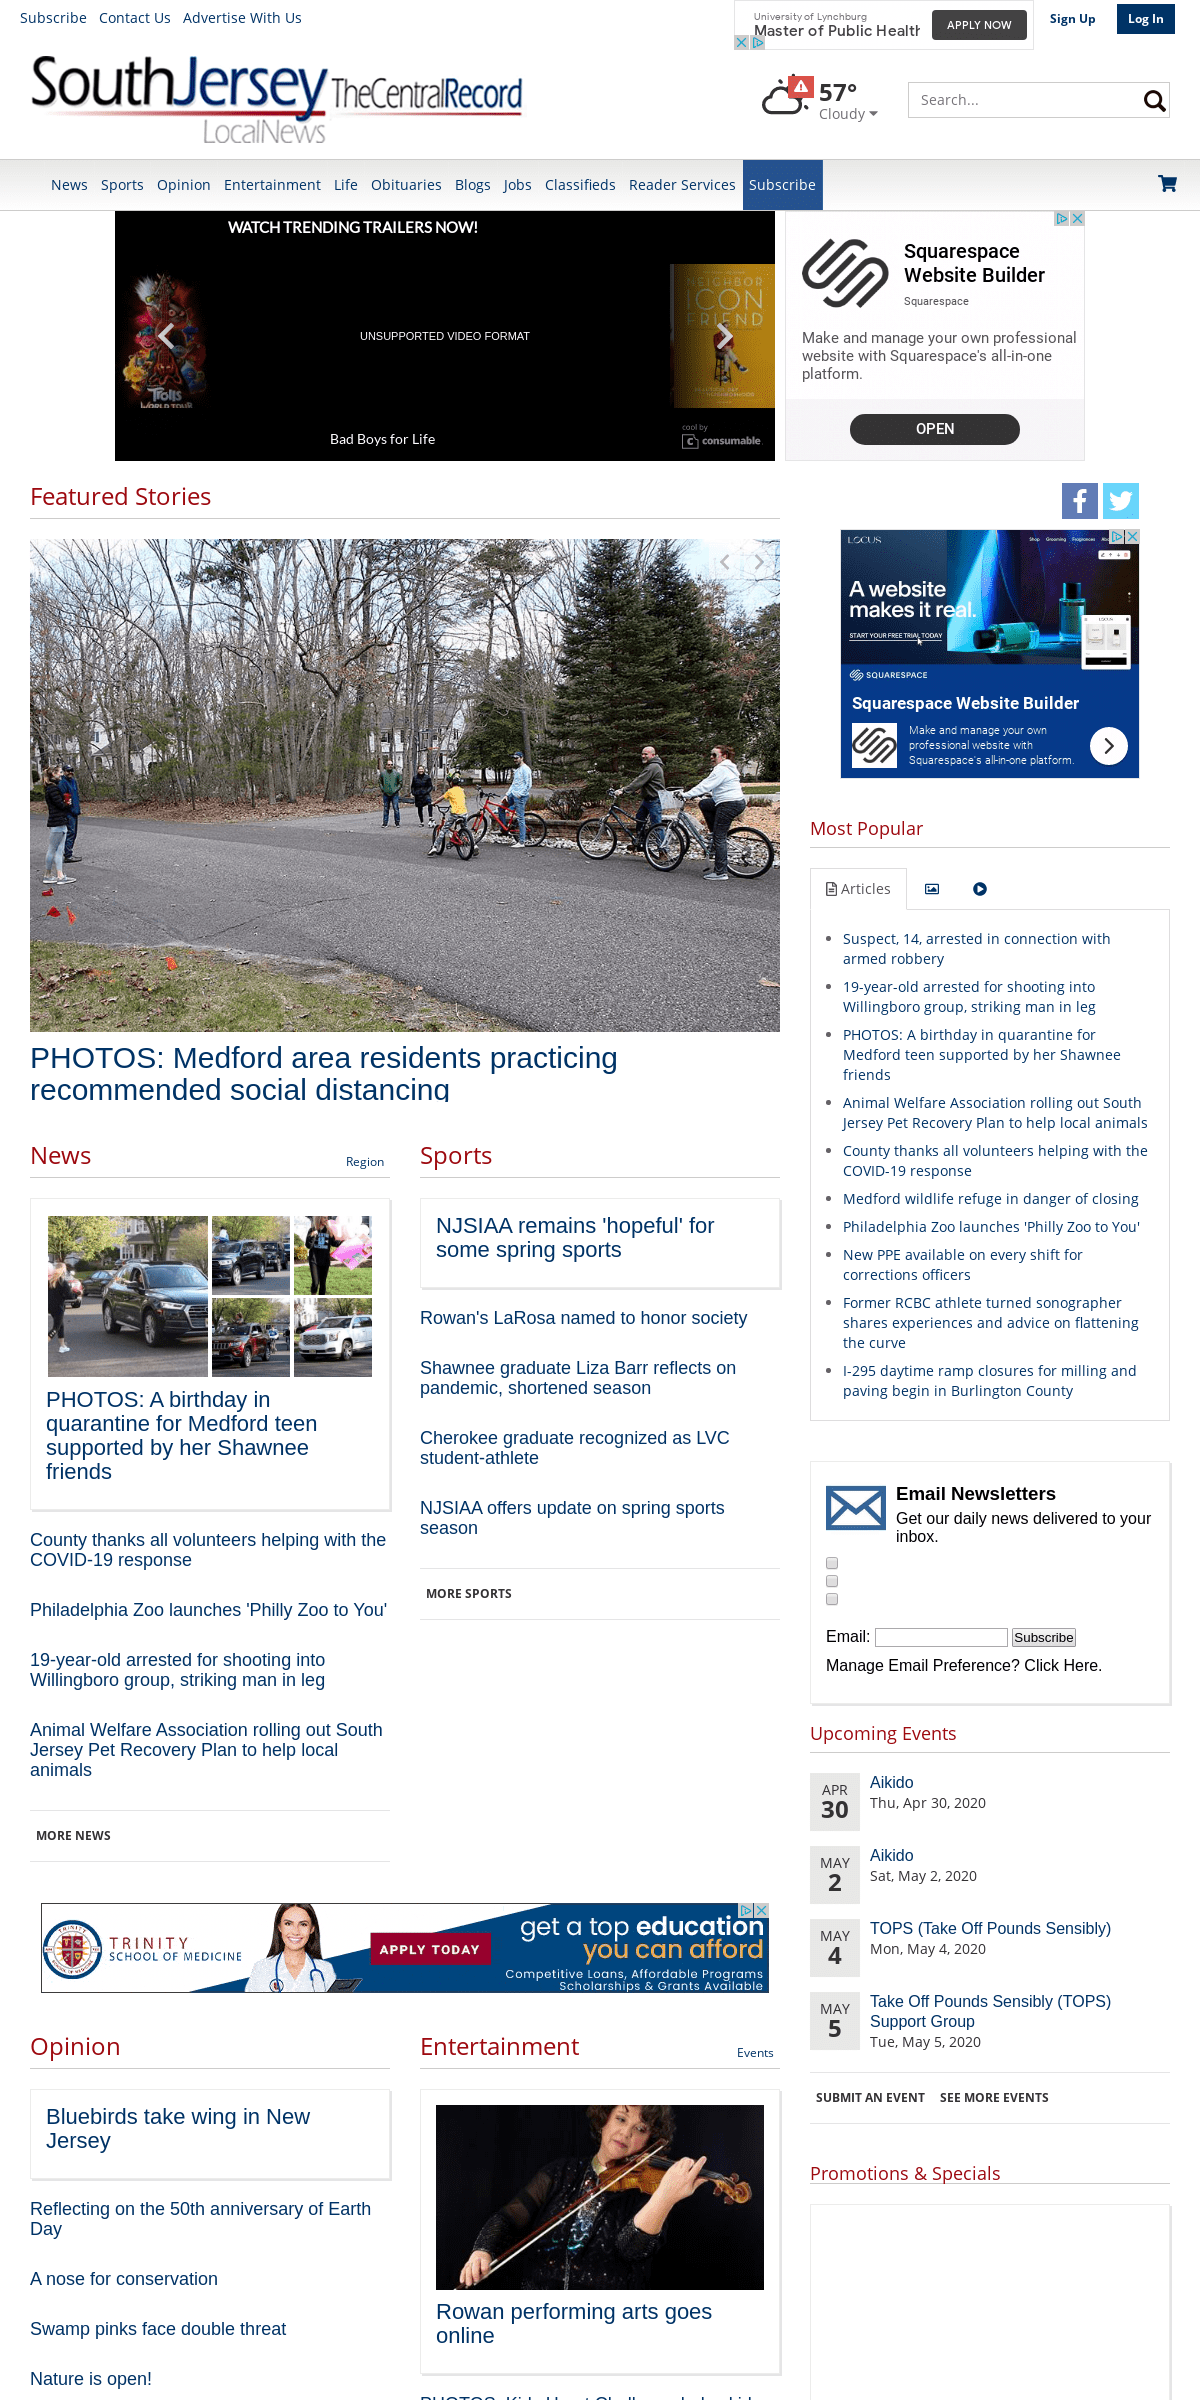 A complete backup of southjerseylocalnews.com